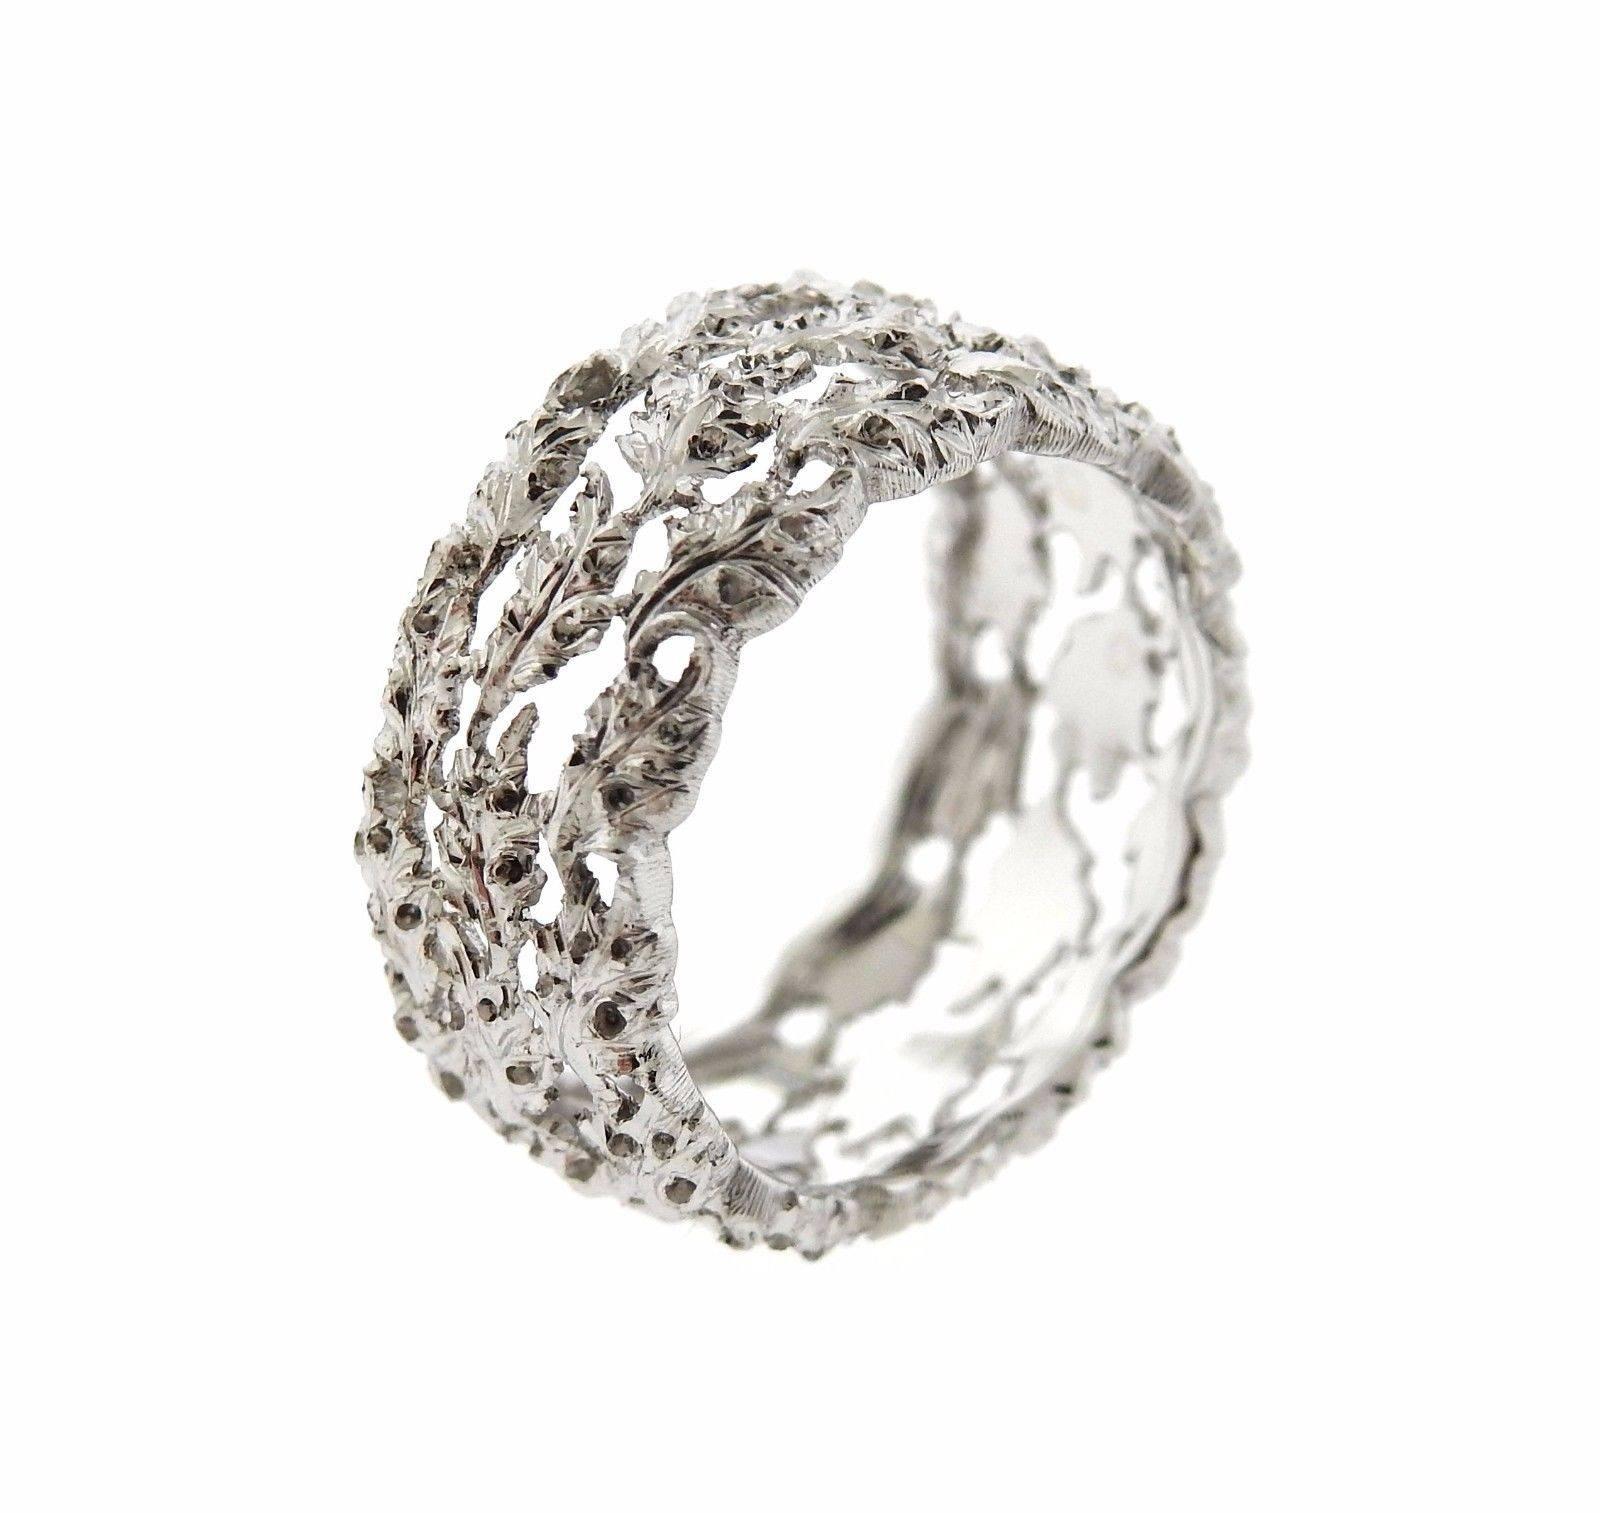 An 18k white gold ring by Buccellati.  The ring is a size 5 3/4, and is 9.2mm wide.  The weight of the ring is 4 grams. Marked: Buccellati, Italy 18k.  Retail of the ring is $7,010. Comes with Buccellati paperwork. 
